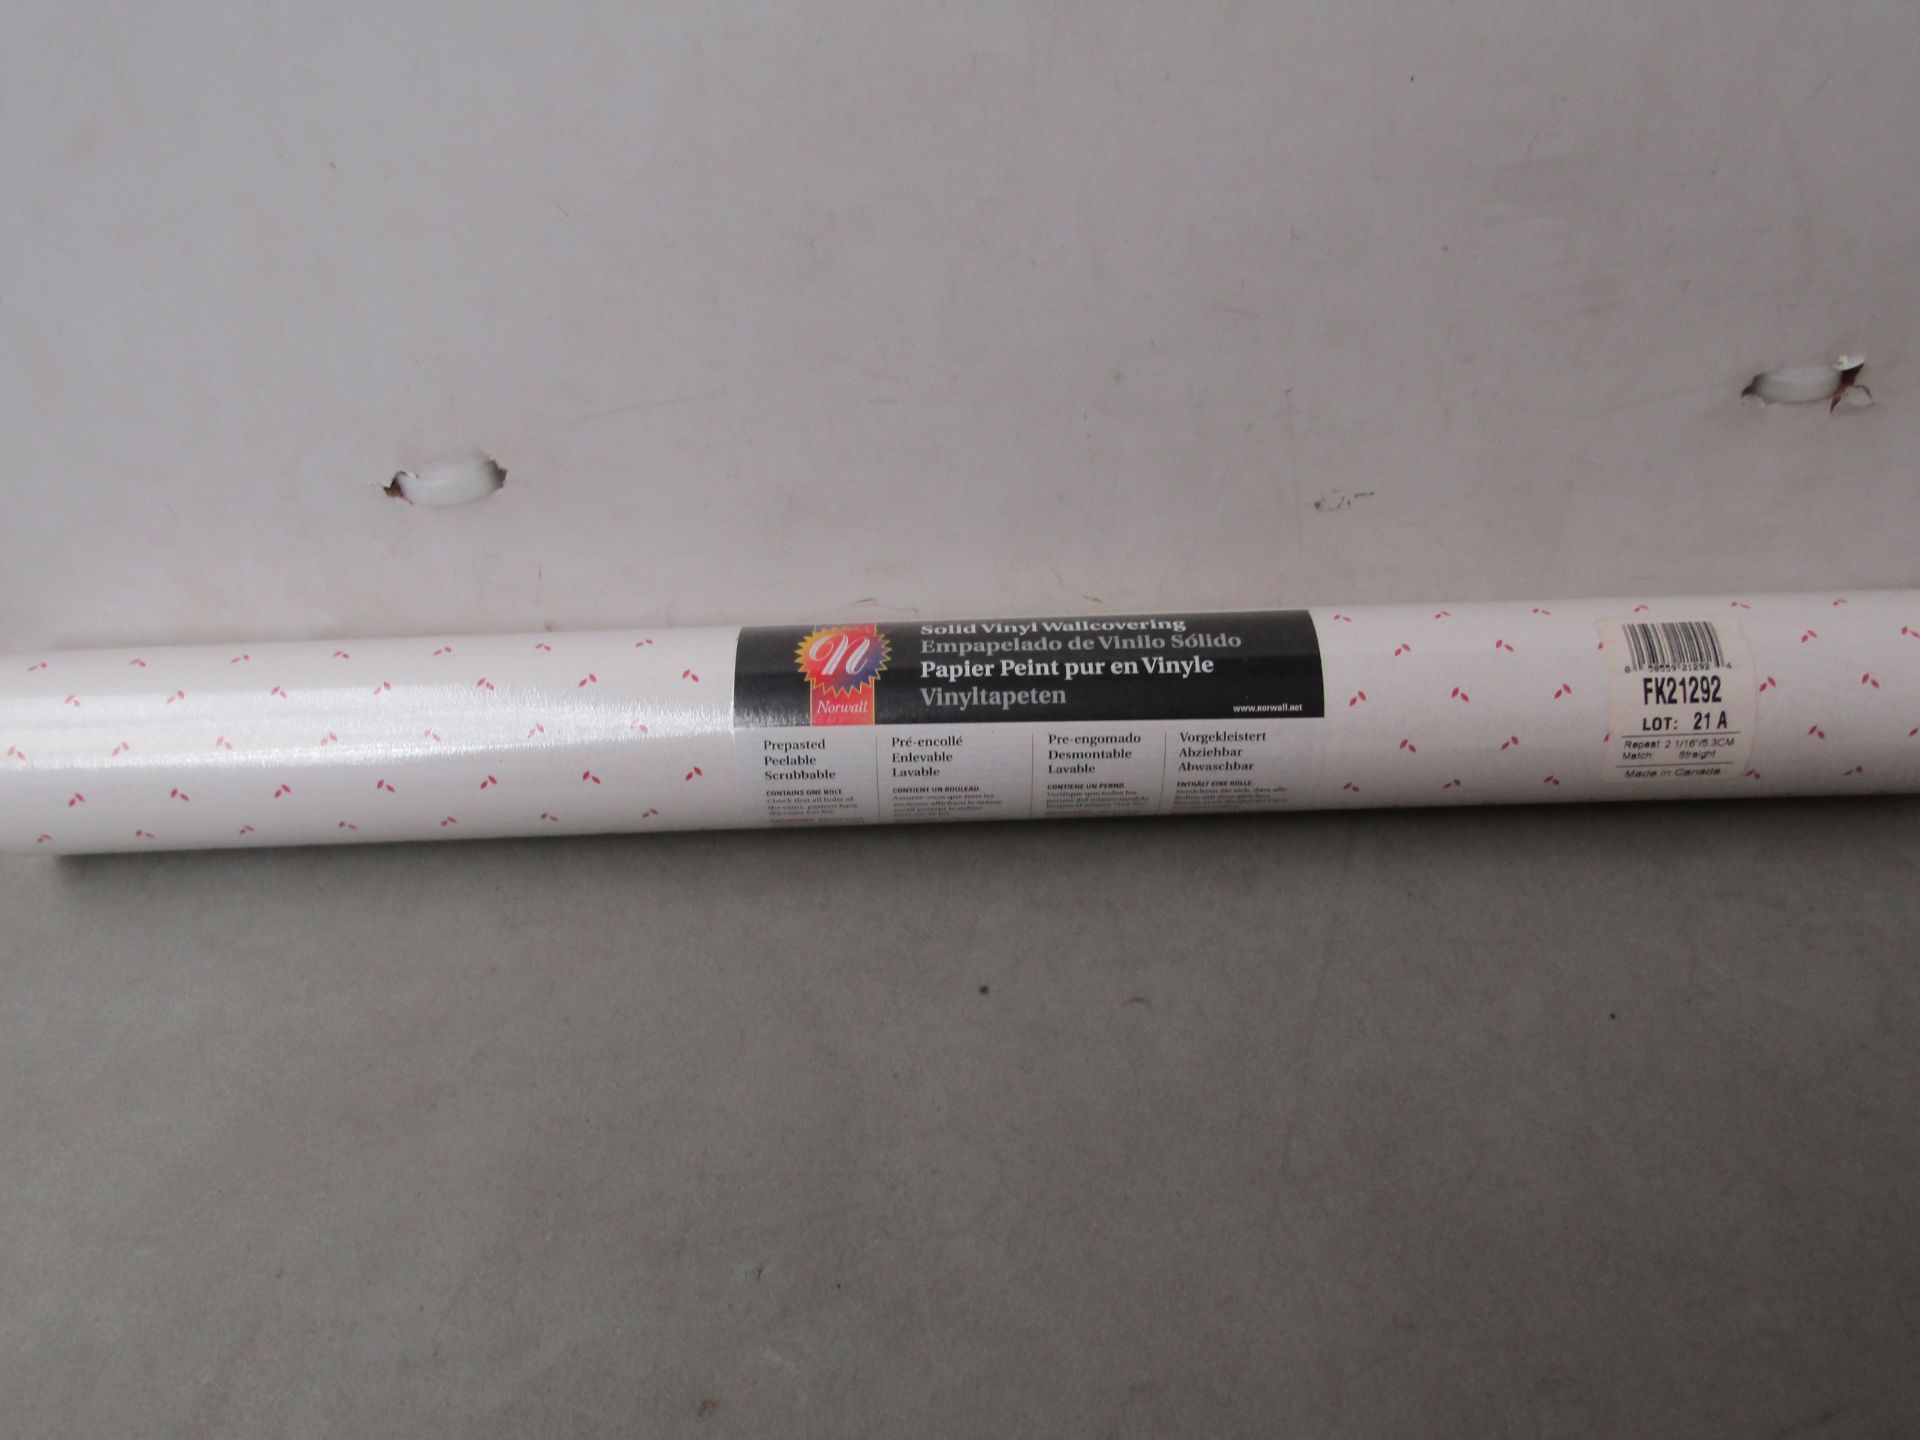 6 x Rolls of Norwall Wallcoverings Solid Vinyl Wallcovering new & packaged see image for design